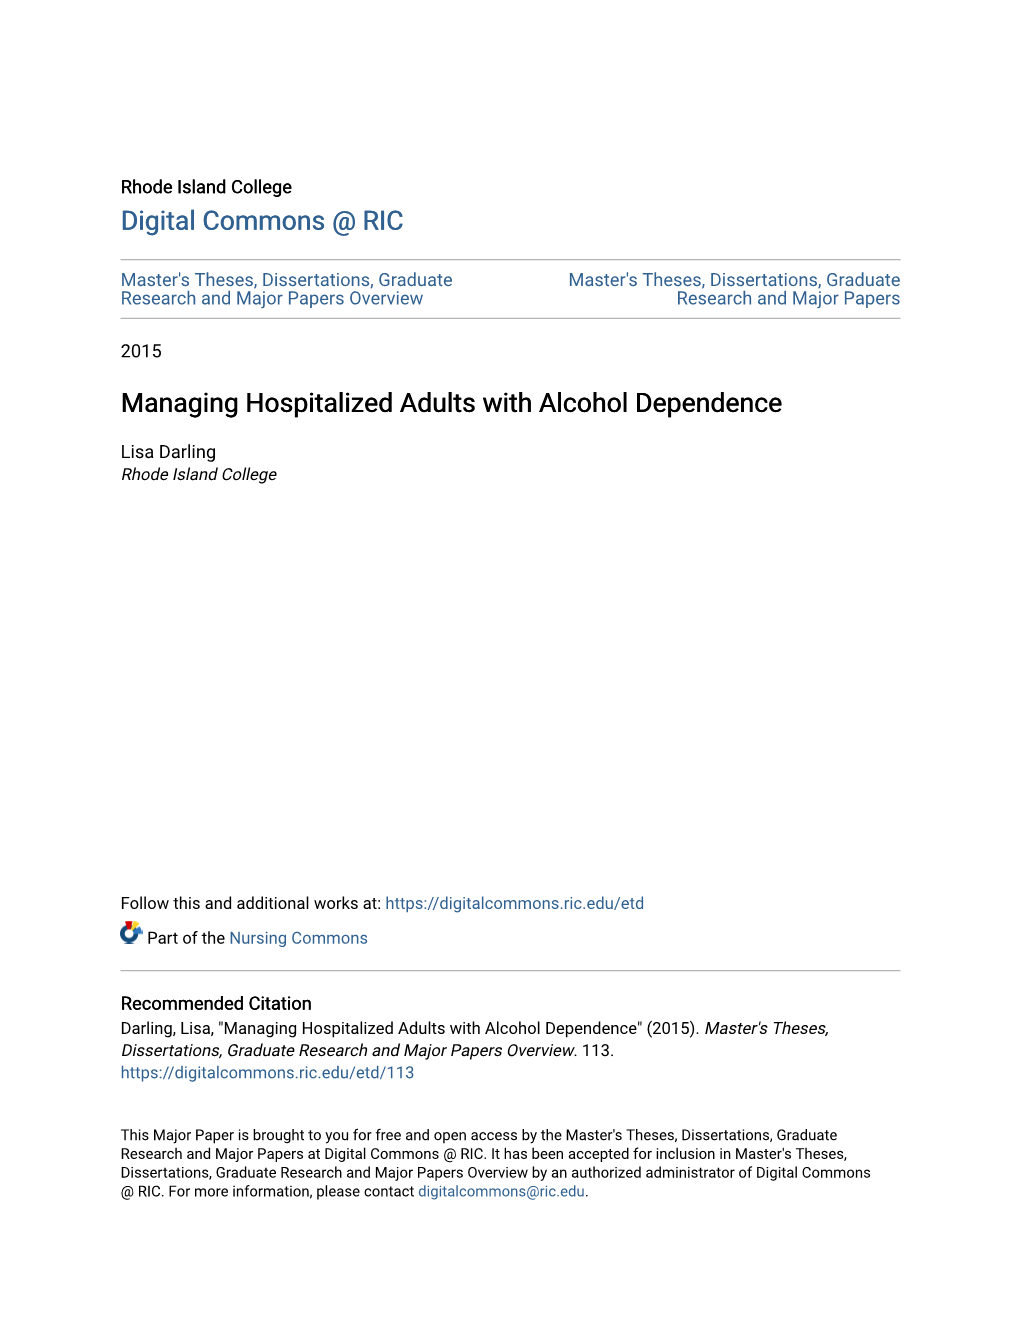 Managing Hospitalized Adults with Alcohol Dependence